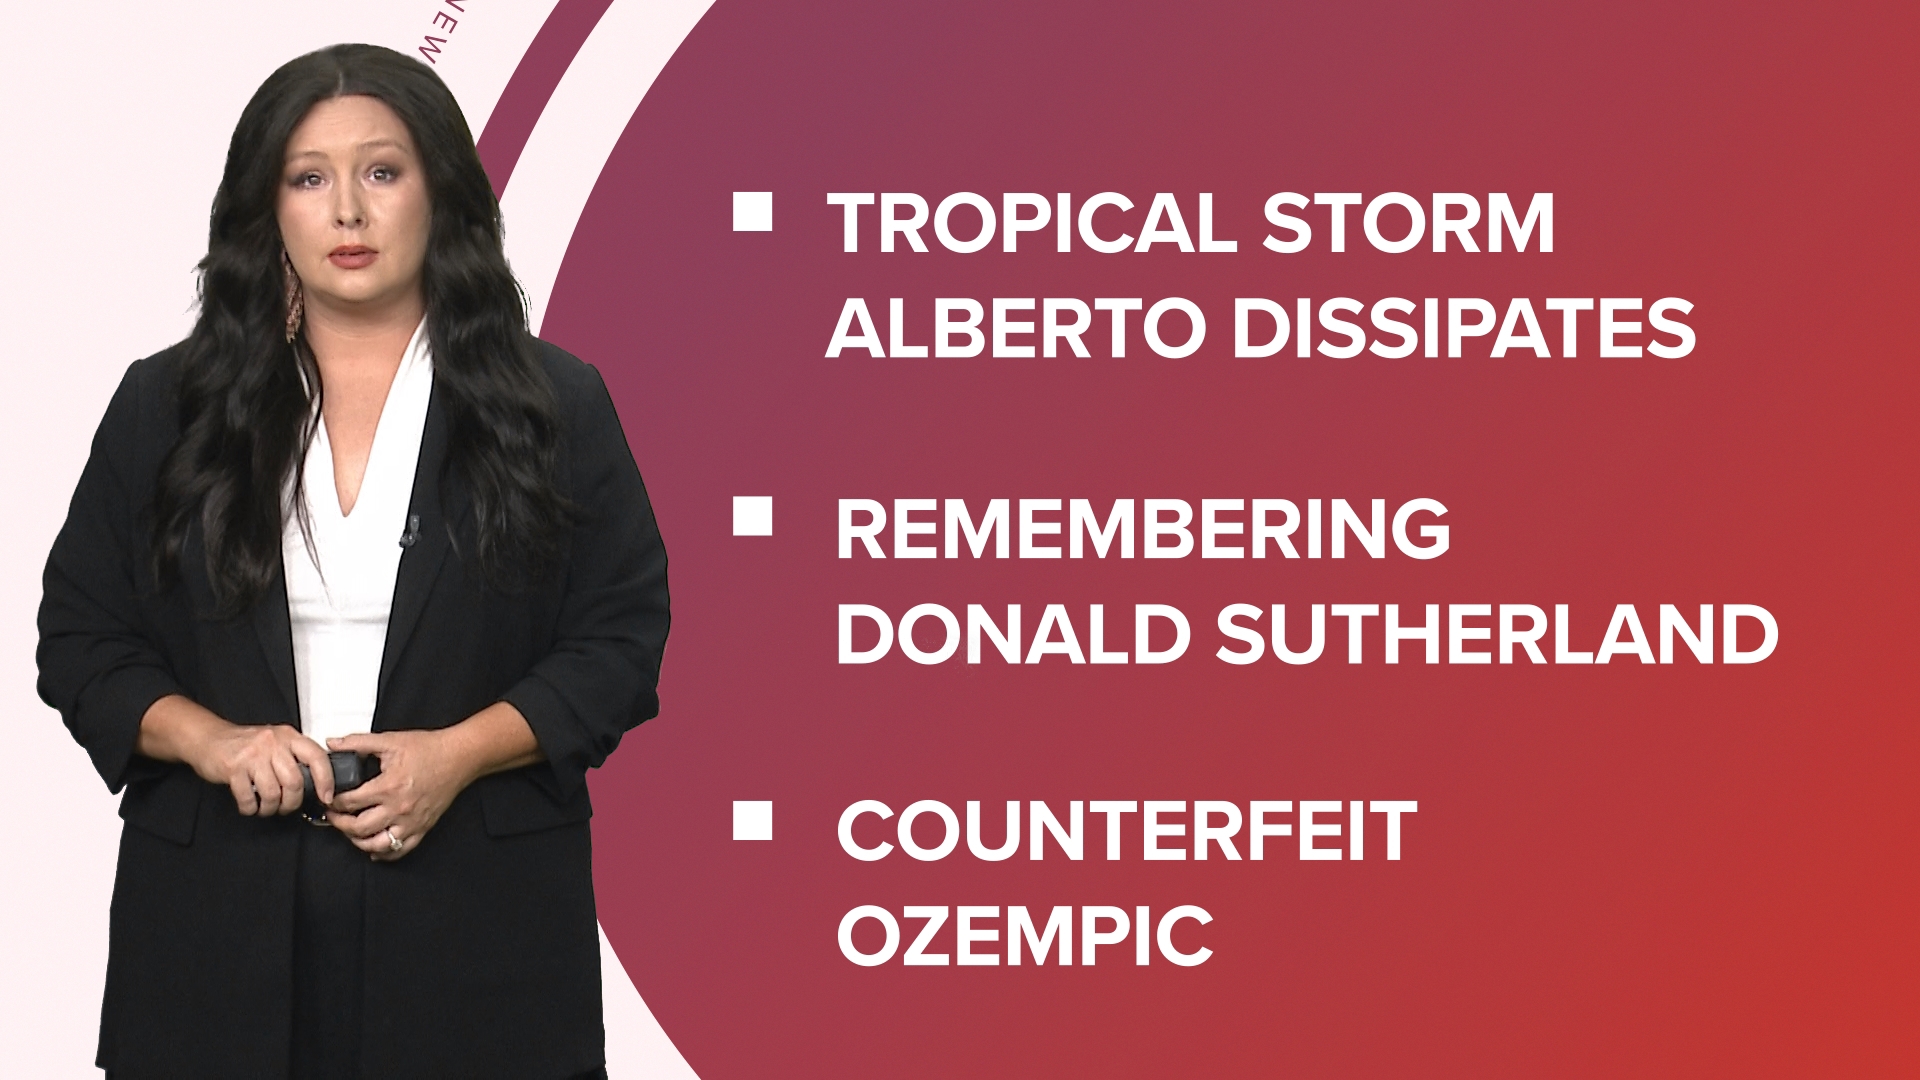 A look at what is happening in the news from Tropical Storm Alberto to the passing of Donald Sutherland and counterfeit weight loss drugs.